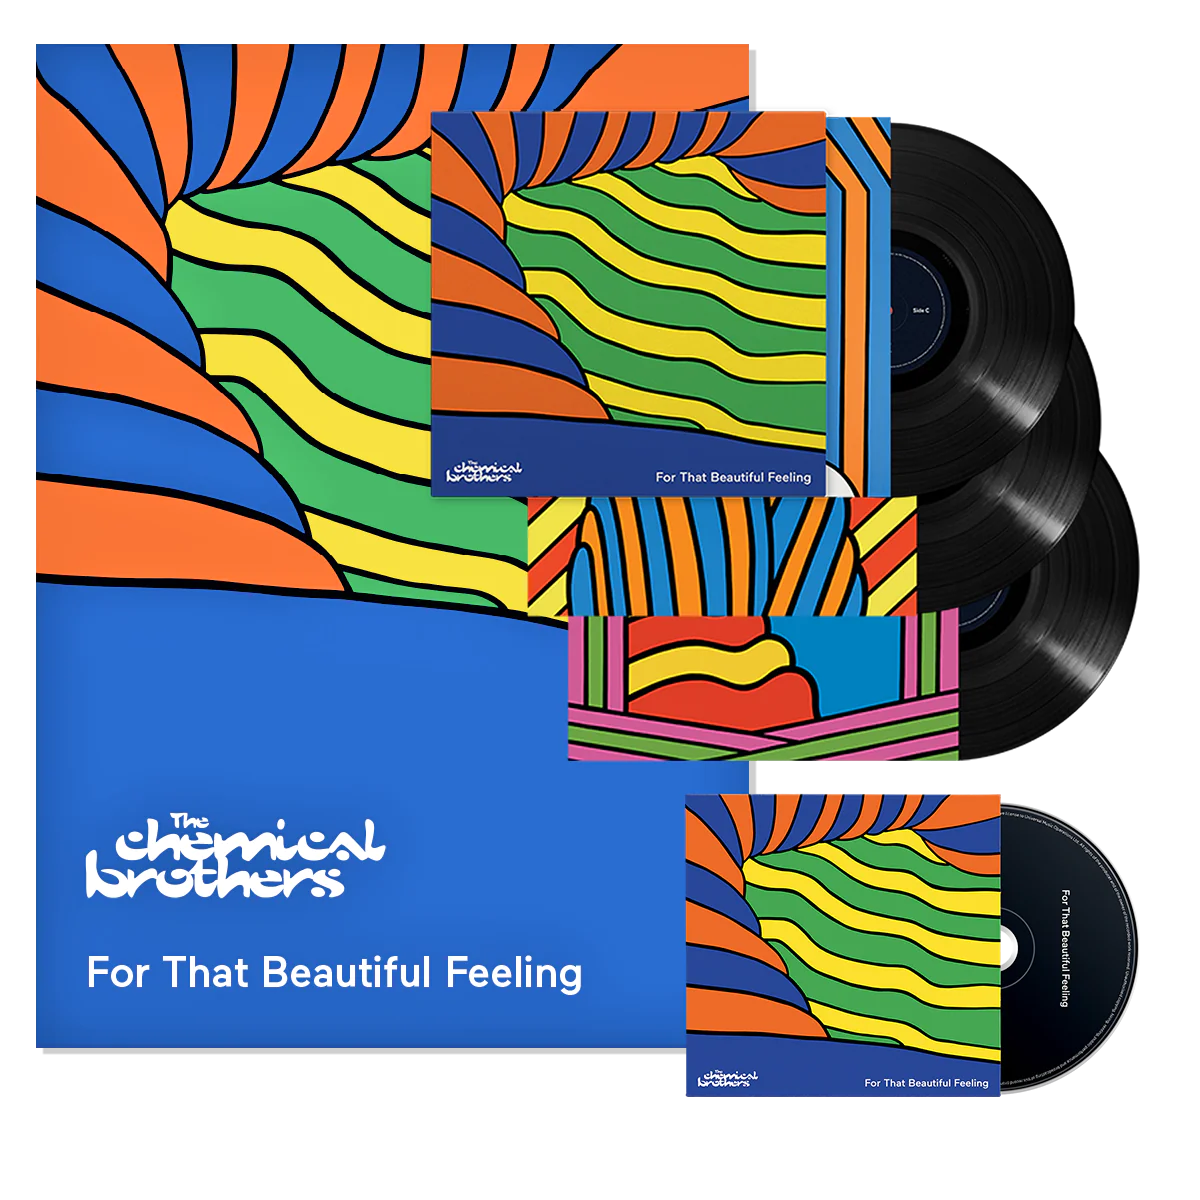 For That Beautiful Feeling: Deluxe Vinyl 3LP, CD + Numbered Art Print